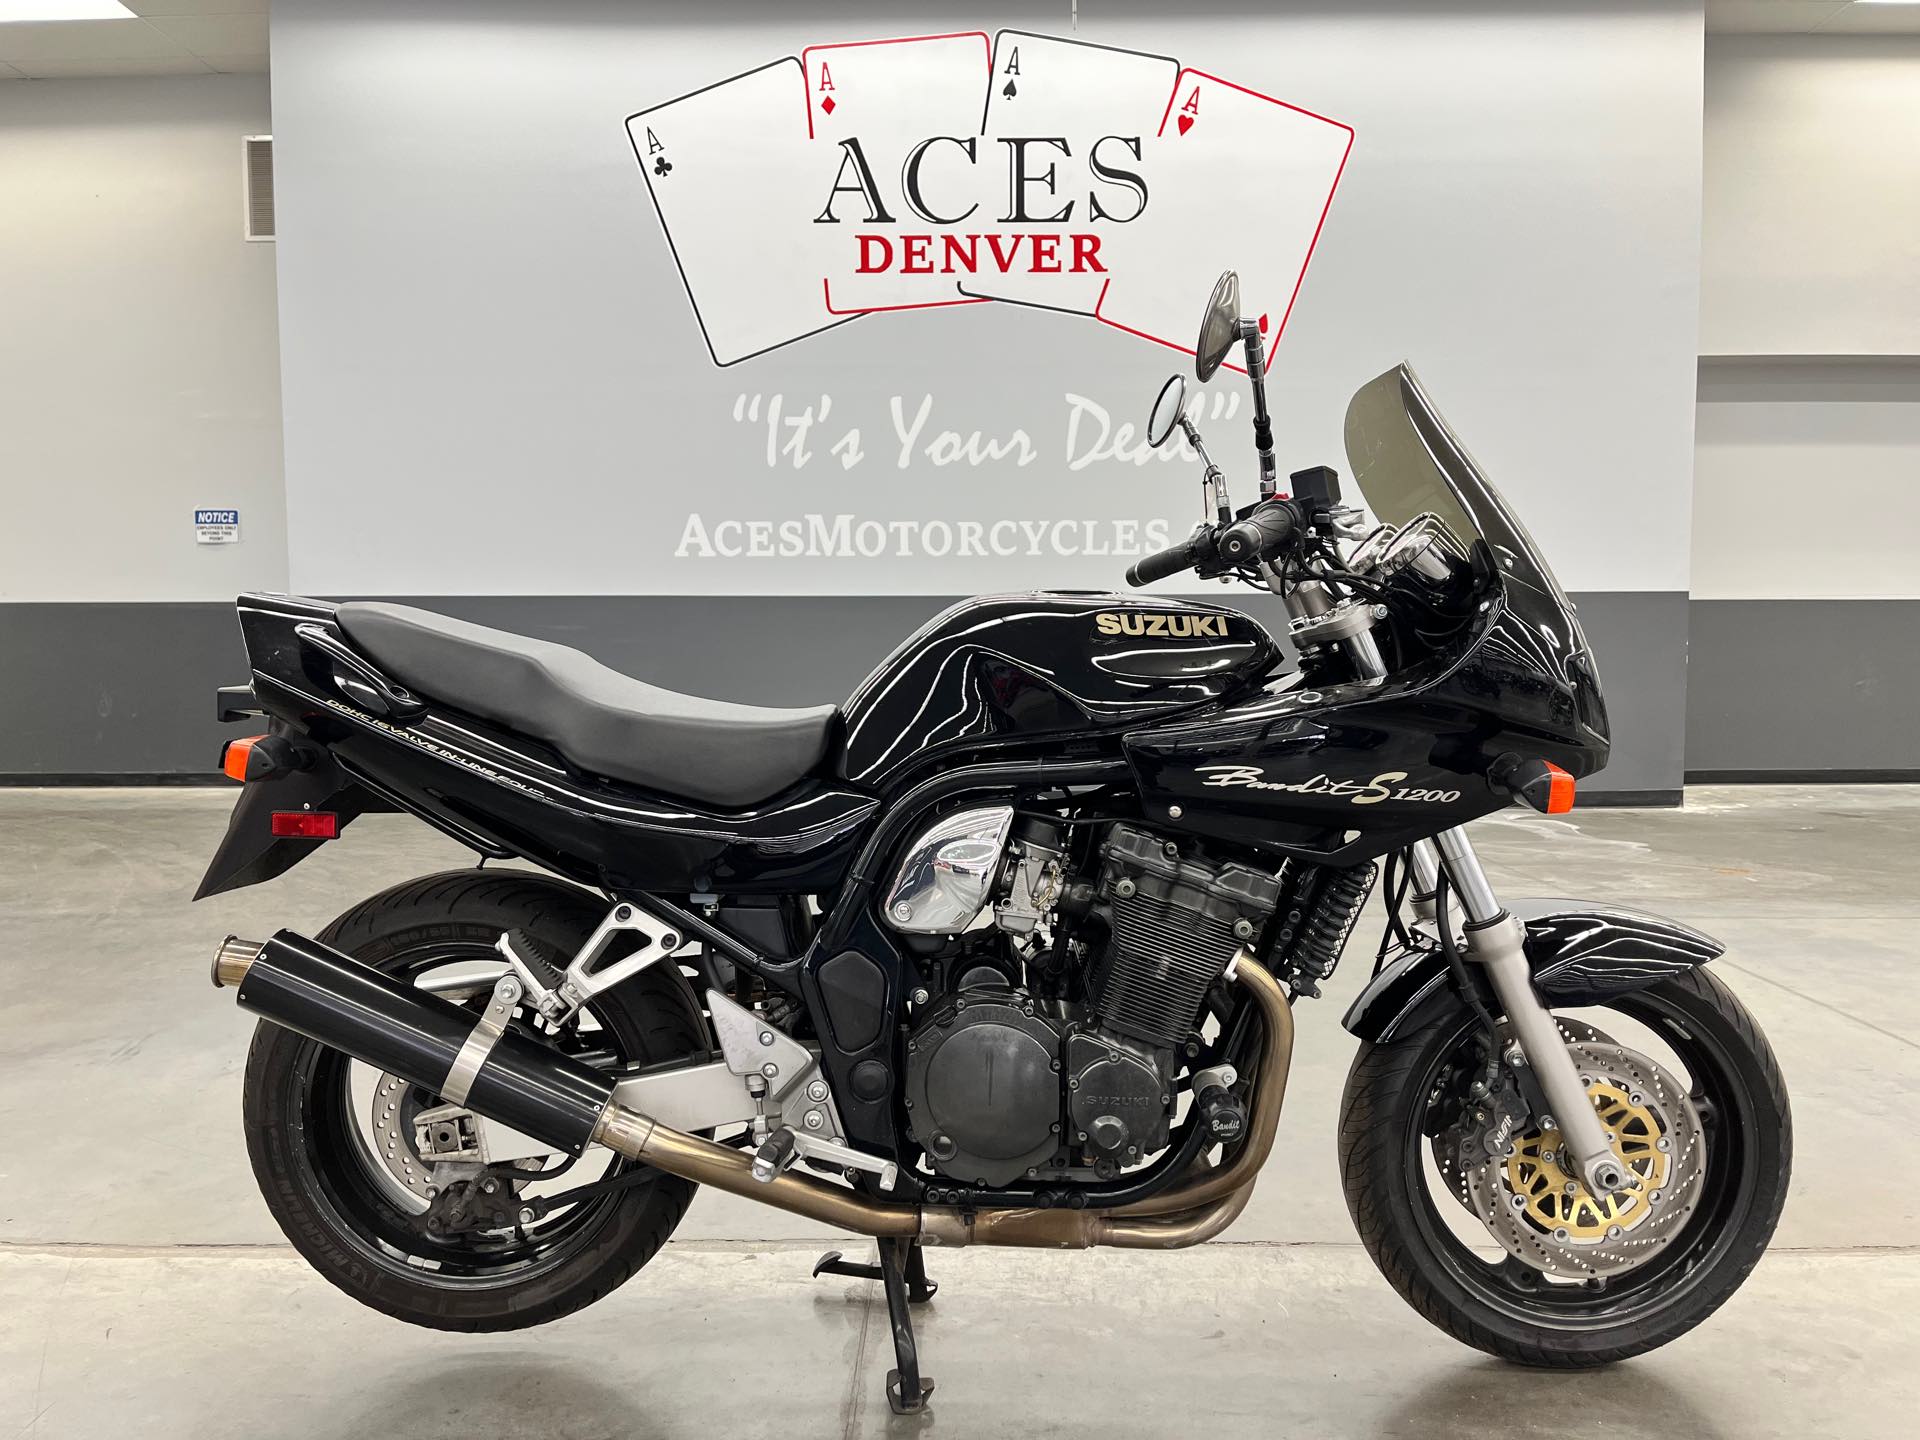 1998 SUZUKI GSF1200S at Aces Motorcycles - Denver